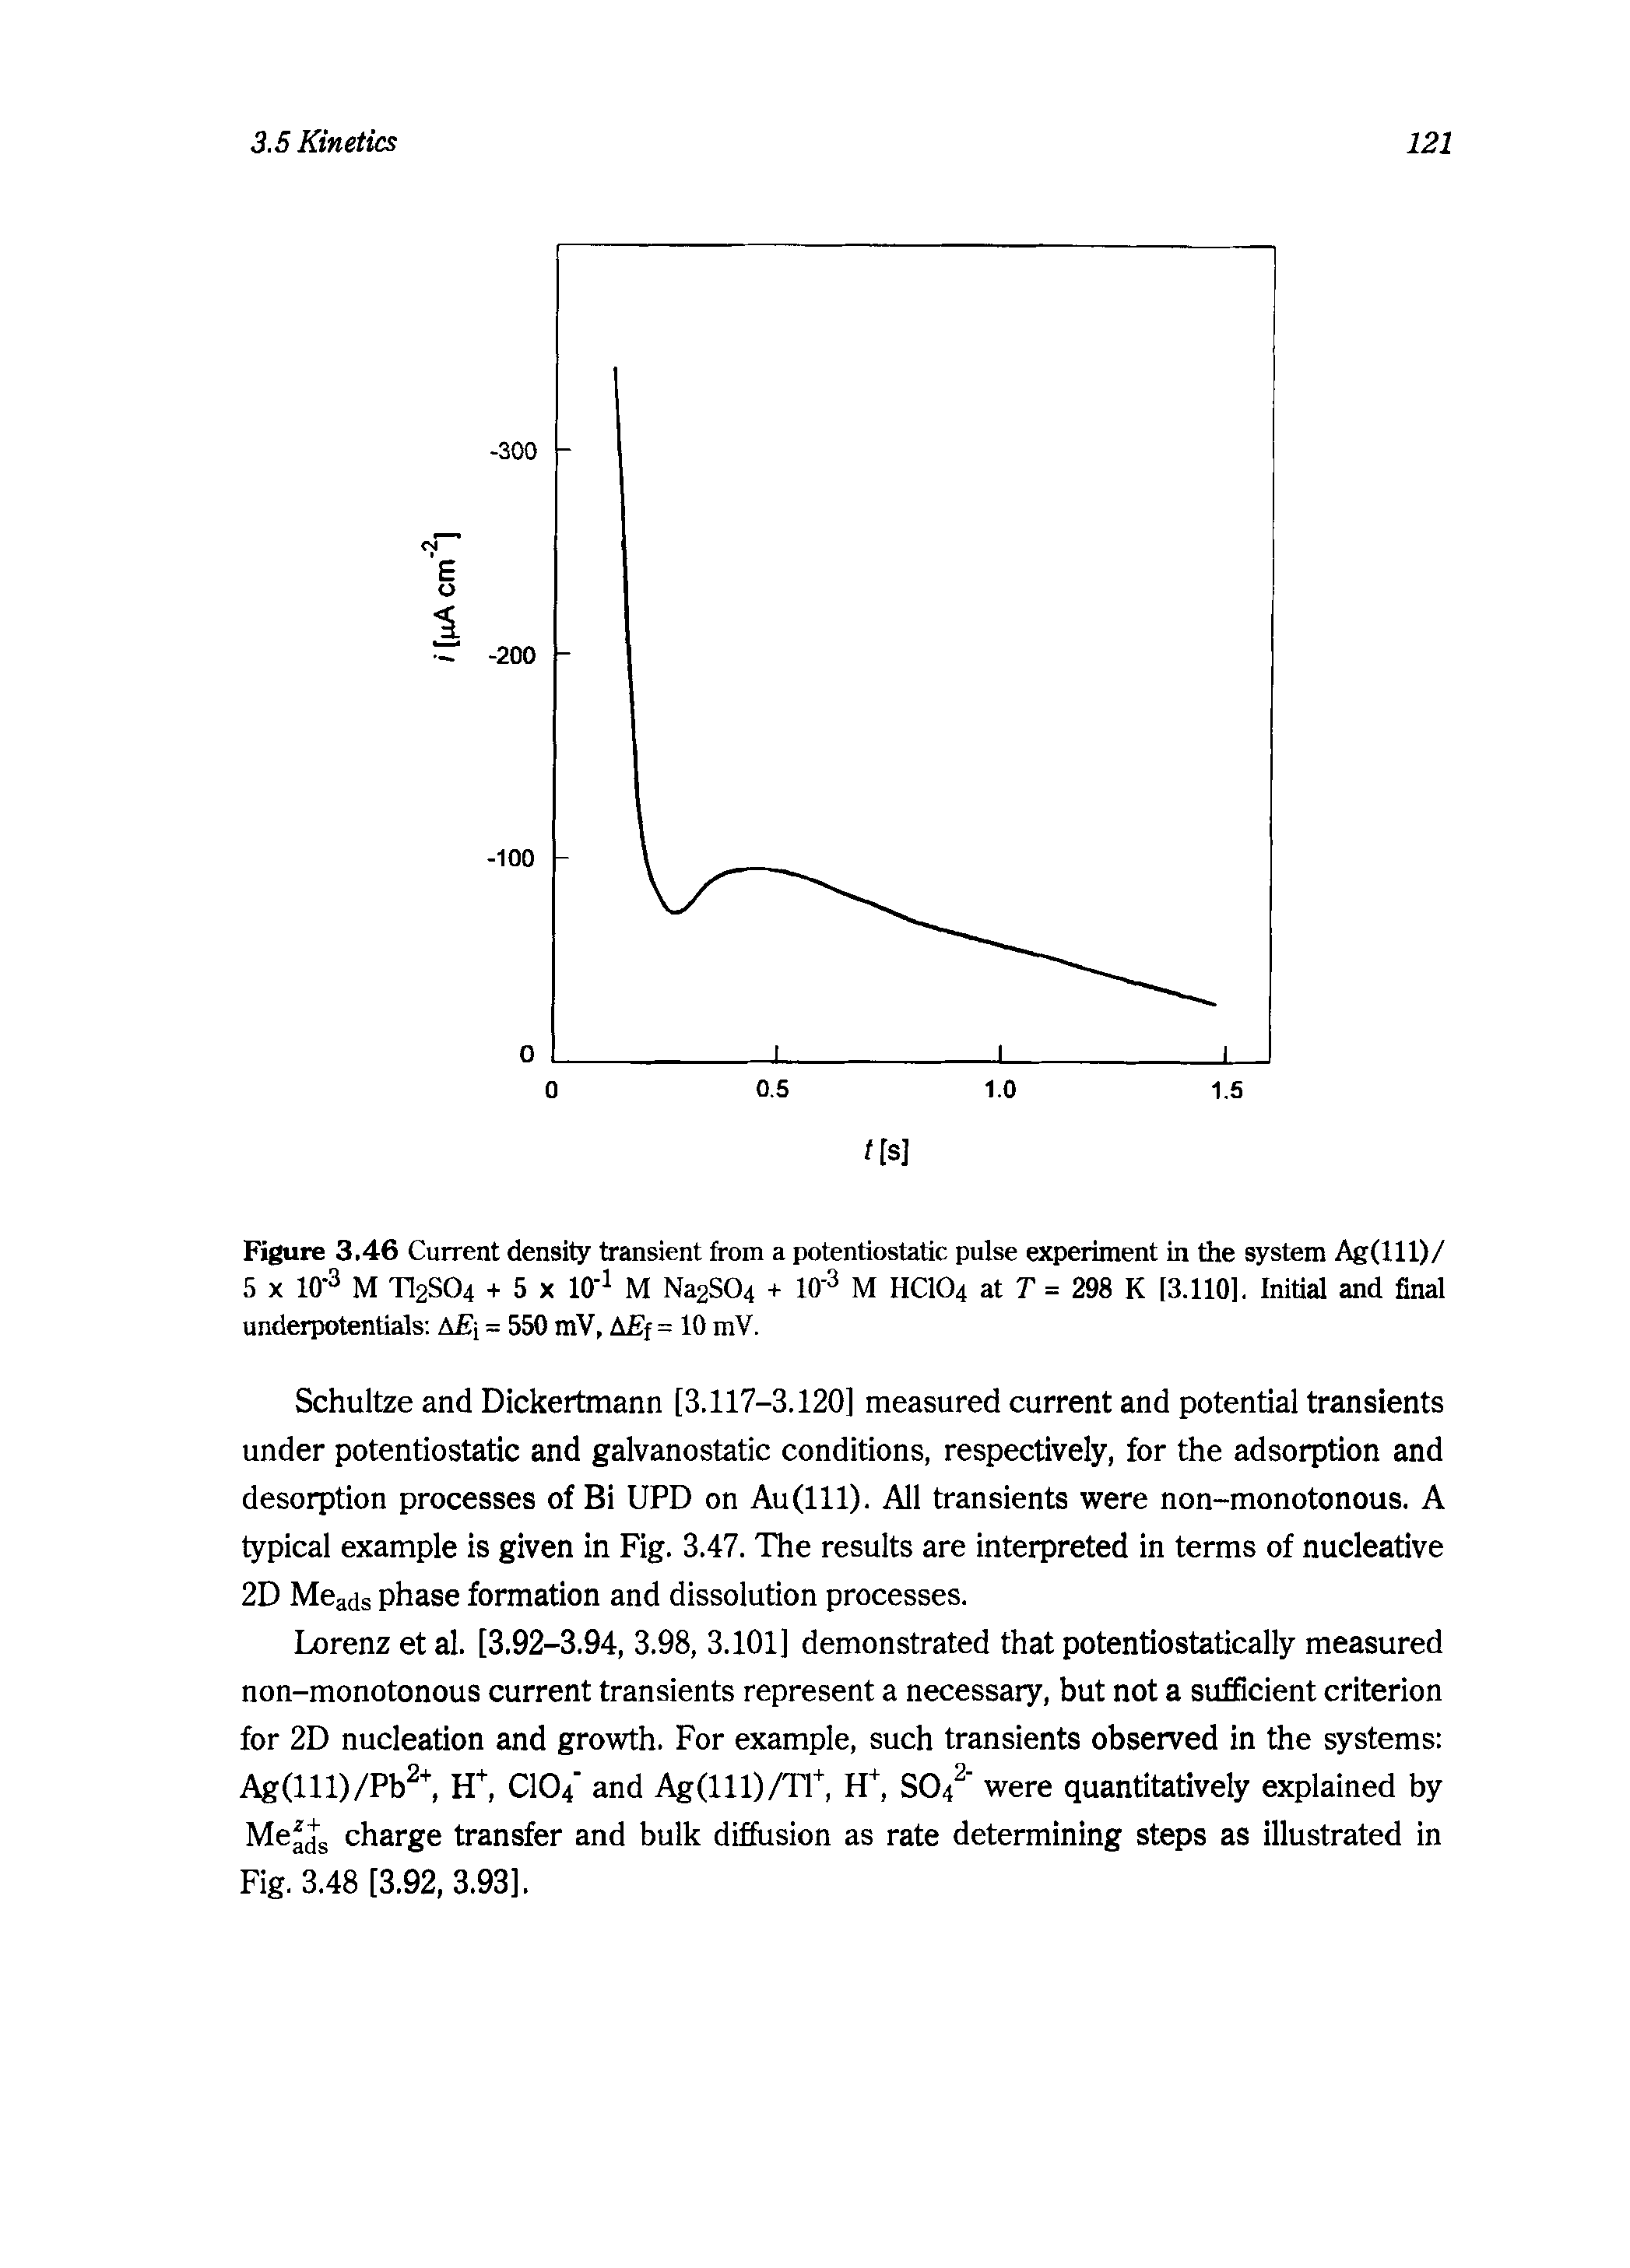 Figure 3.46 Current density transient from a potentiostatic pulse experiment in the system Ag(lll)/ 5 X 10-3 M TI2SO4 + 5 X lO l M Na2S04 + lO M HCIO4 at T = 298 K [3.110], Initial and final underpotentials AJEi = 550 mV, A f = 10 mV.